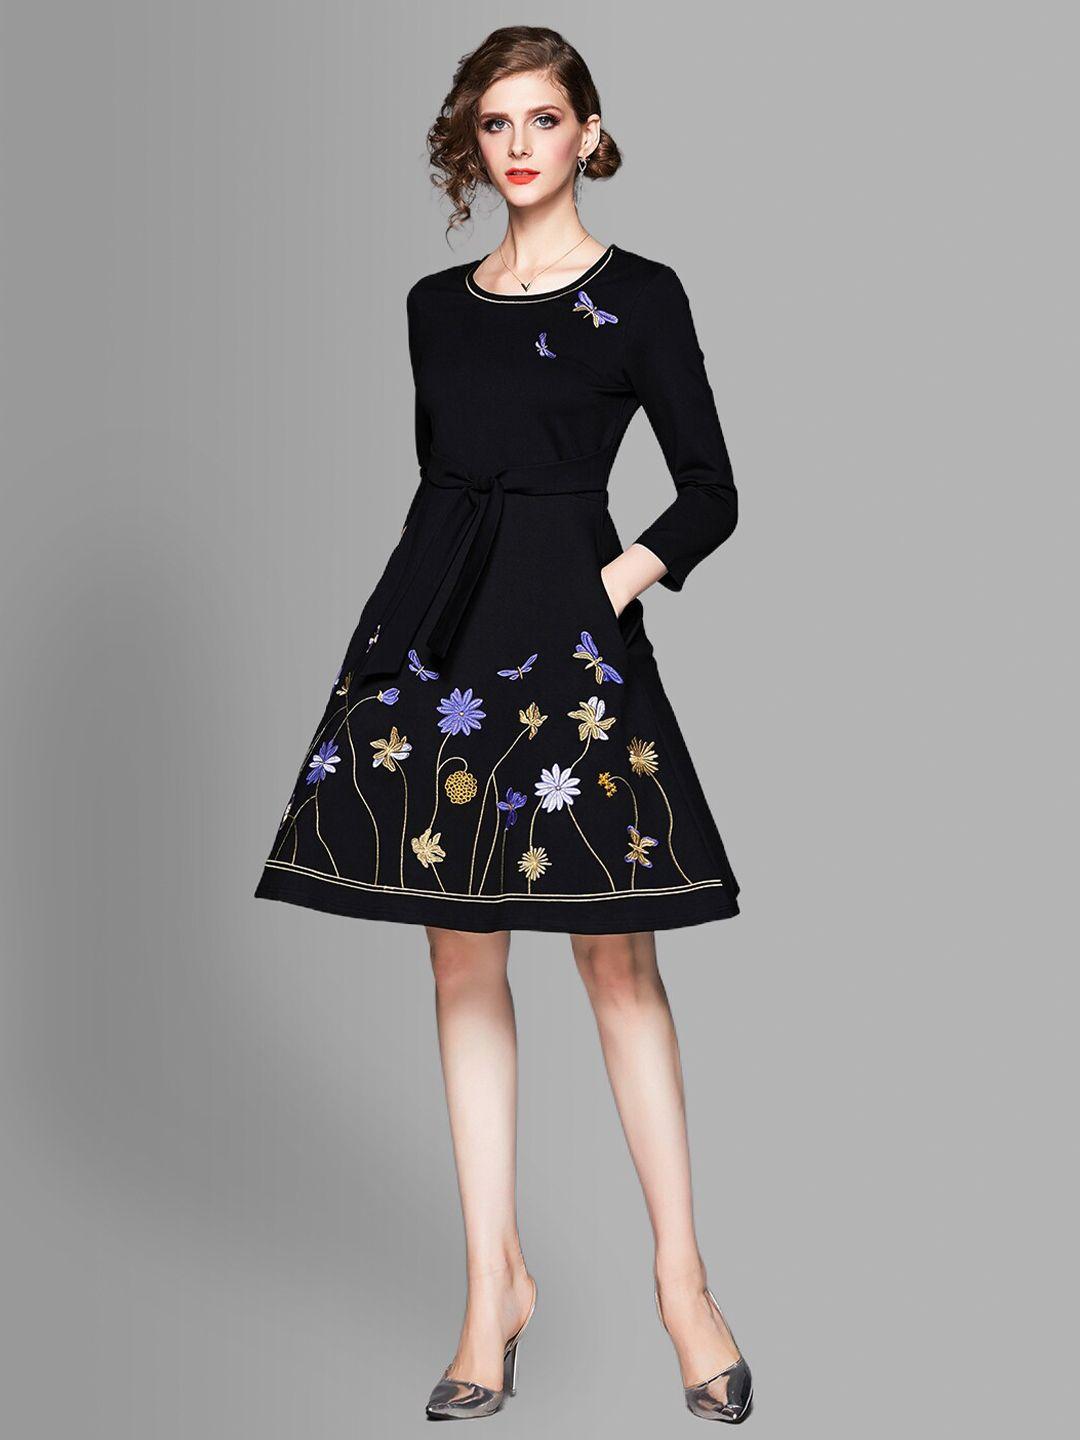 jc collection women black floral embroidered fit & flare dress